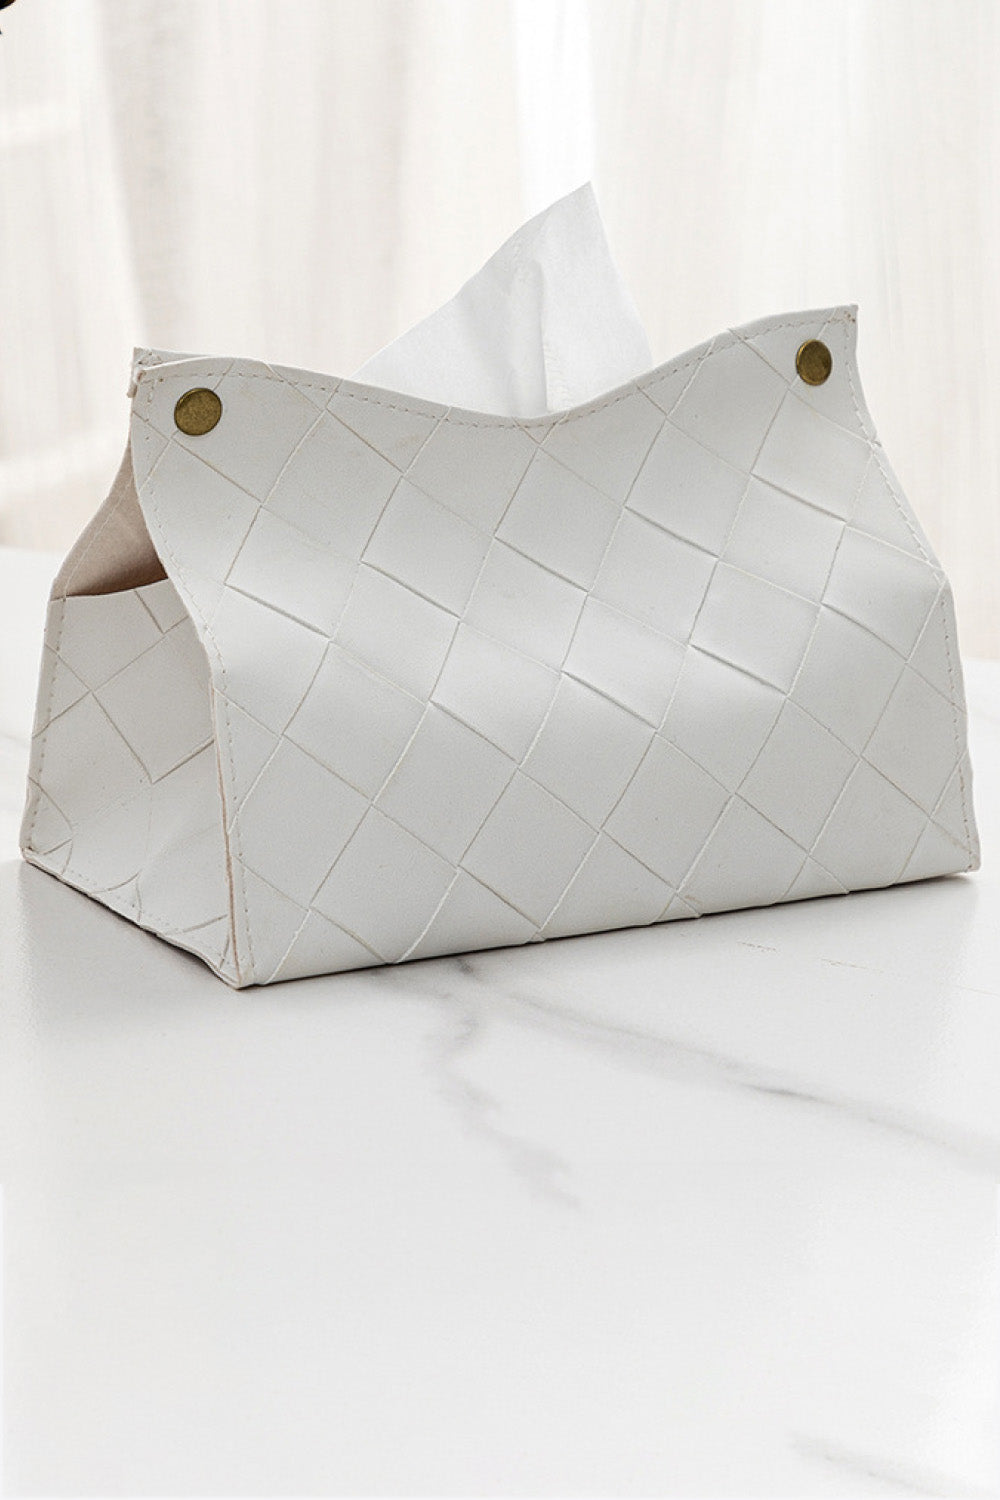 2-Pack Woven PU Tissue Box Covers